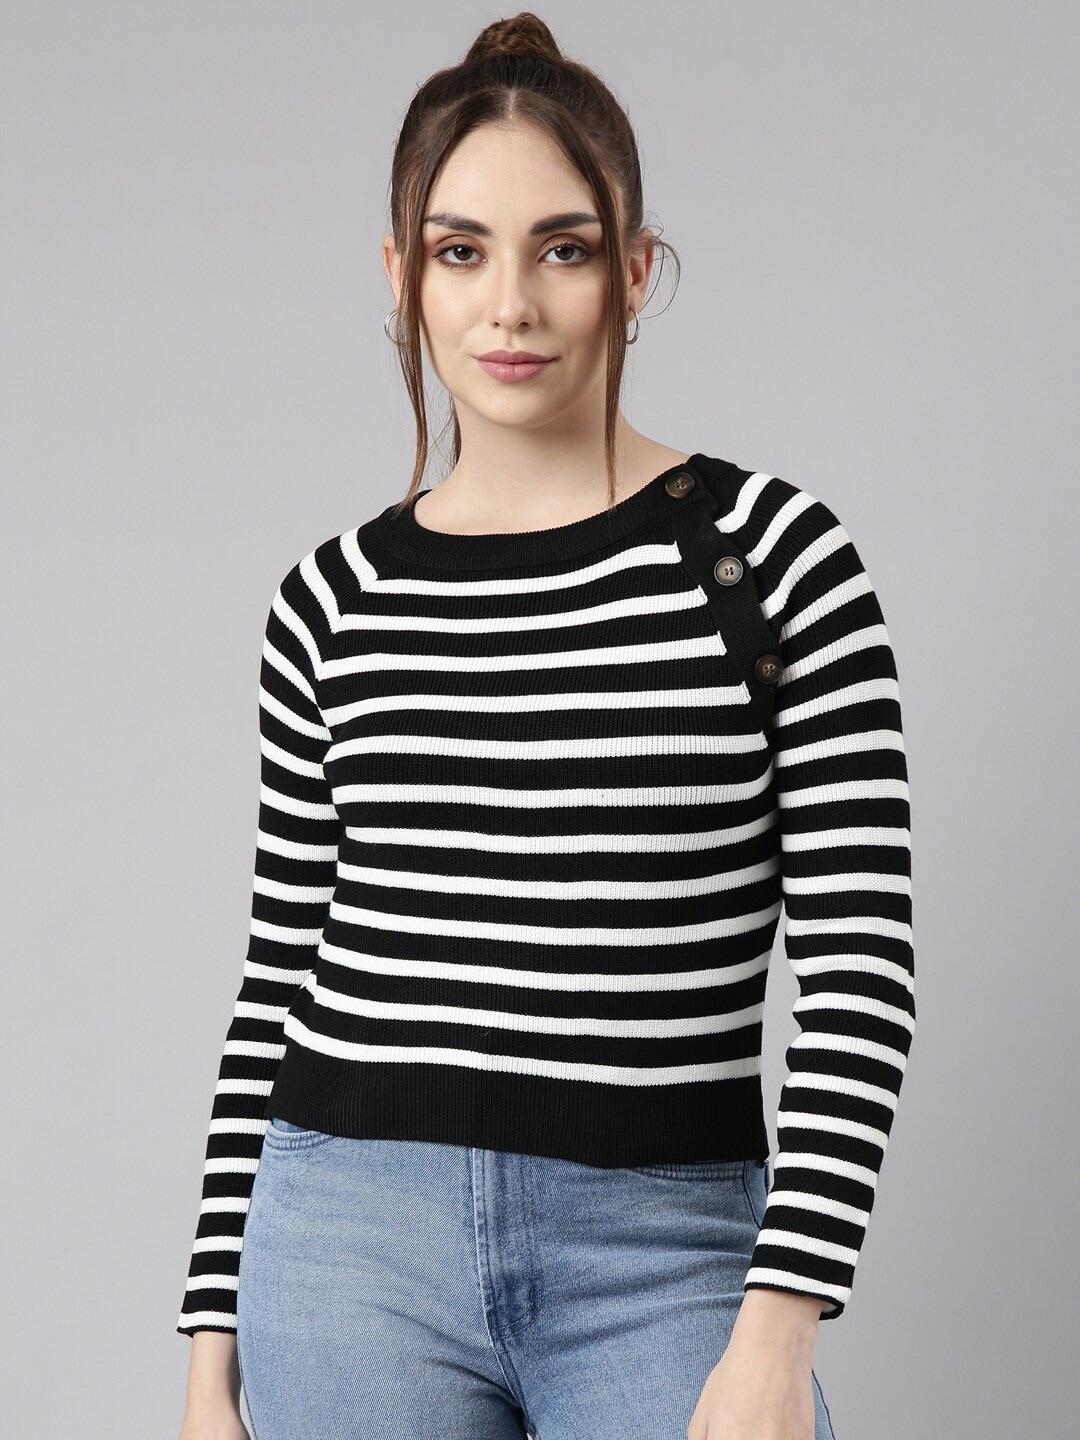 showoff-horizontal-stripes-fitted-top